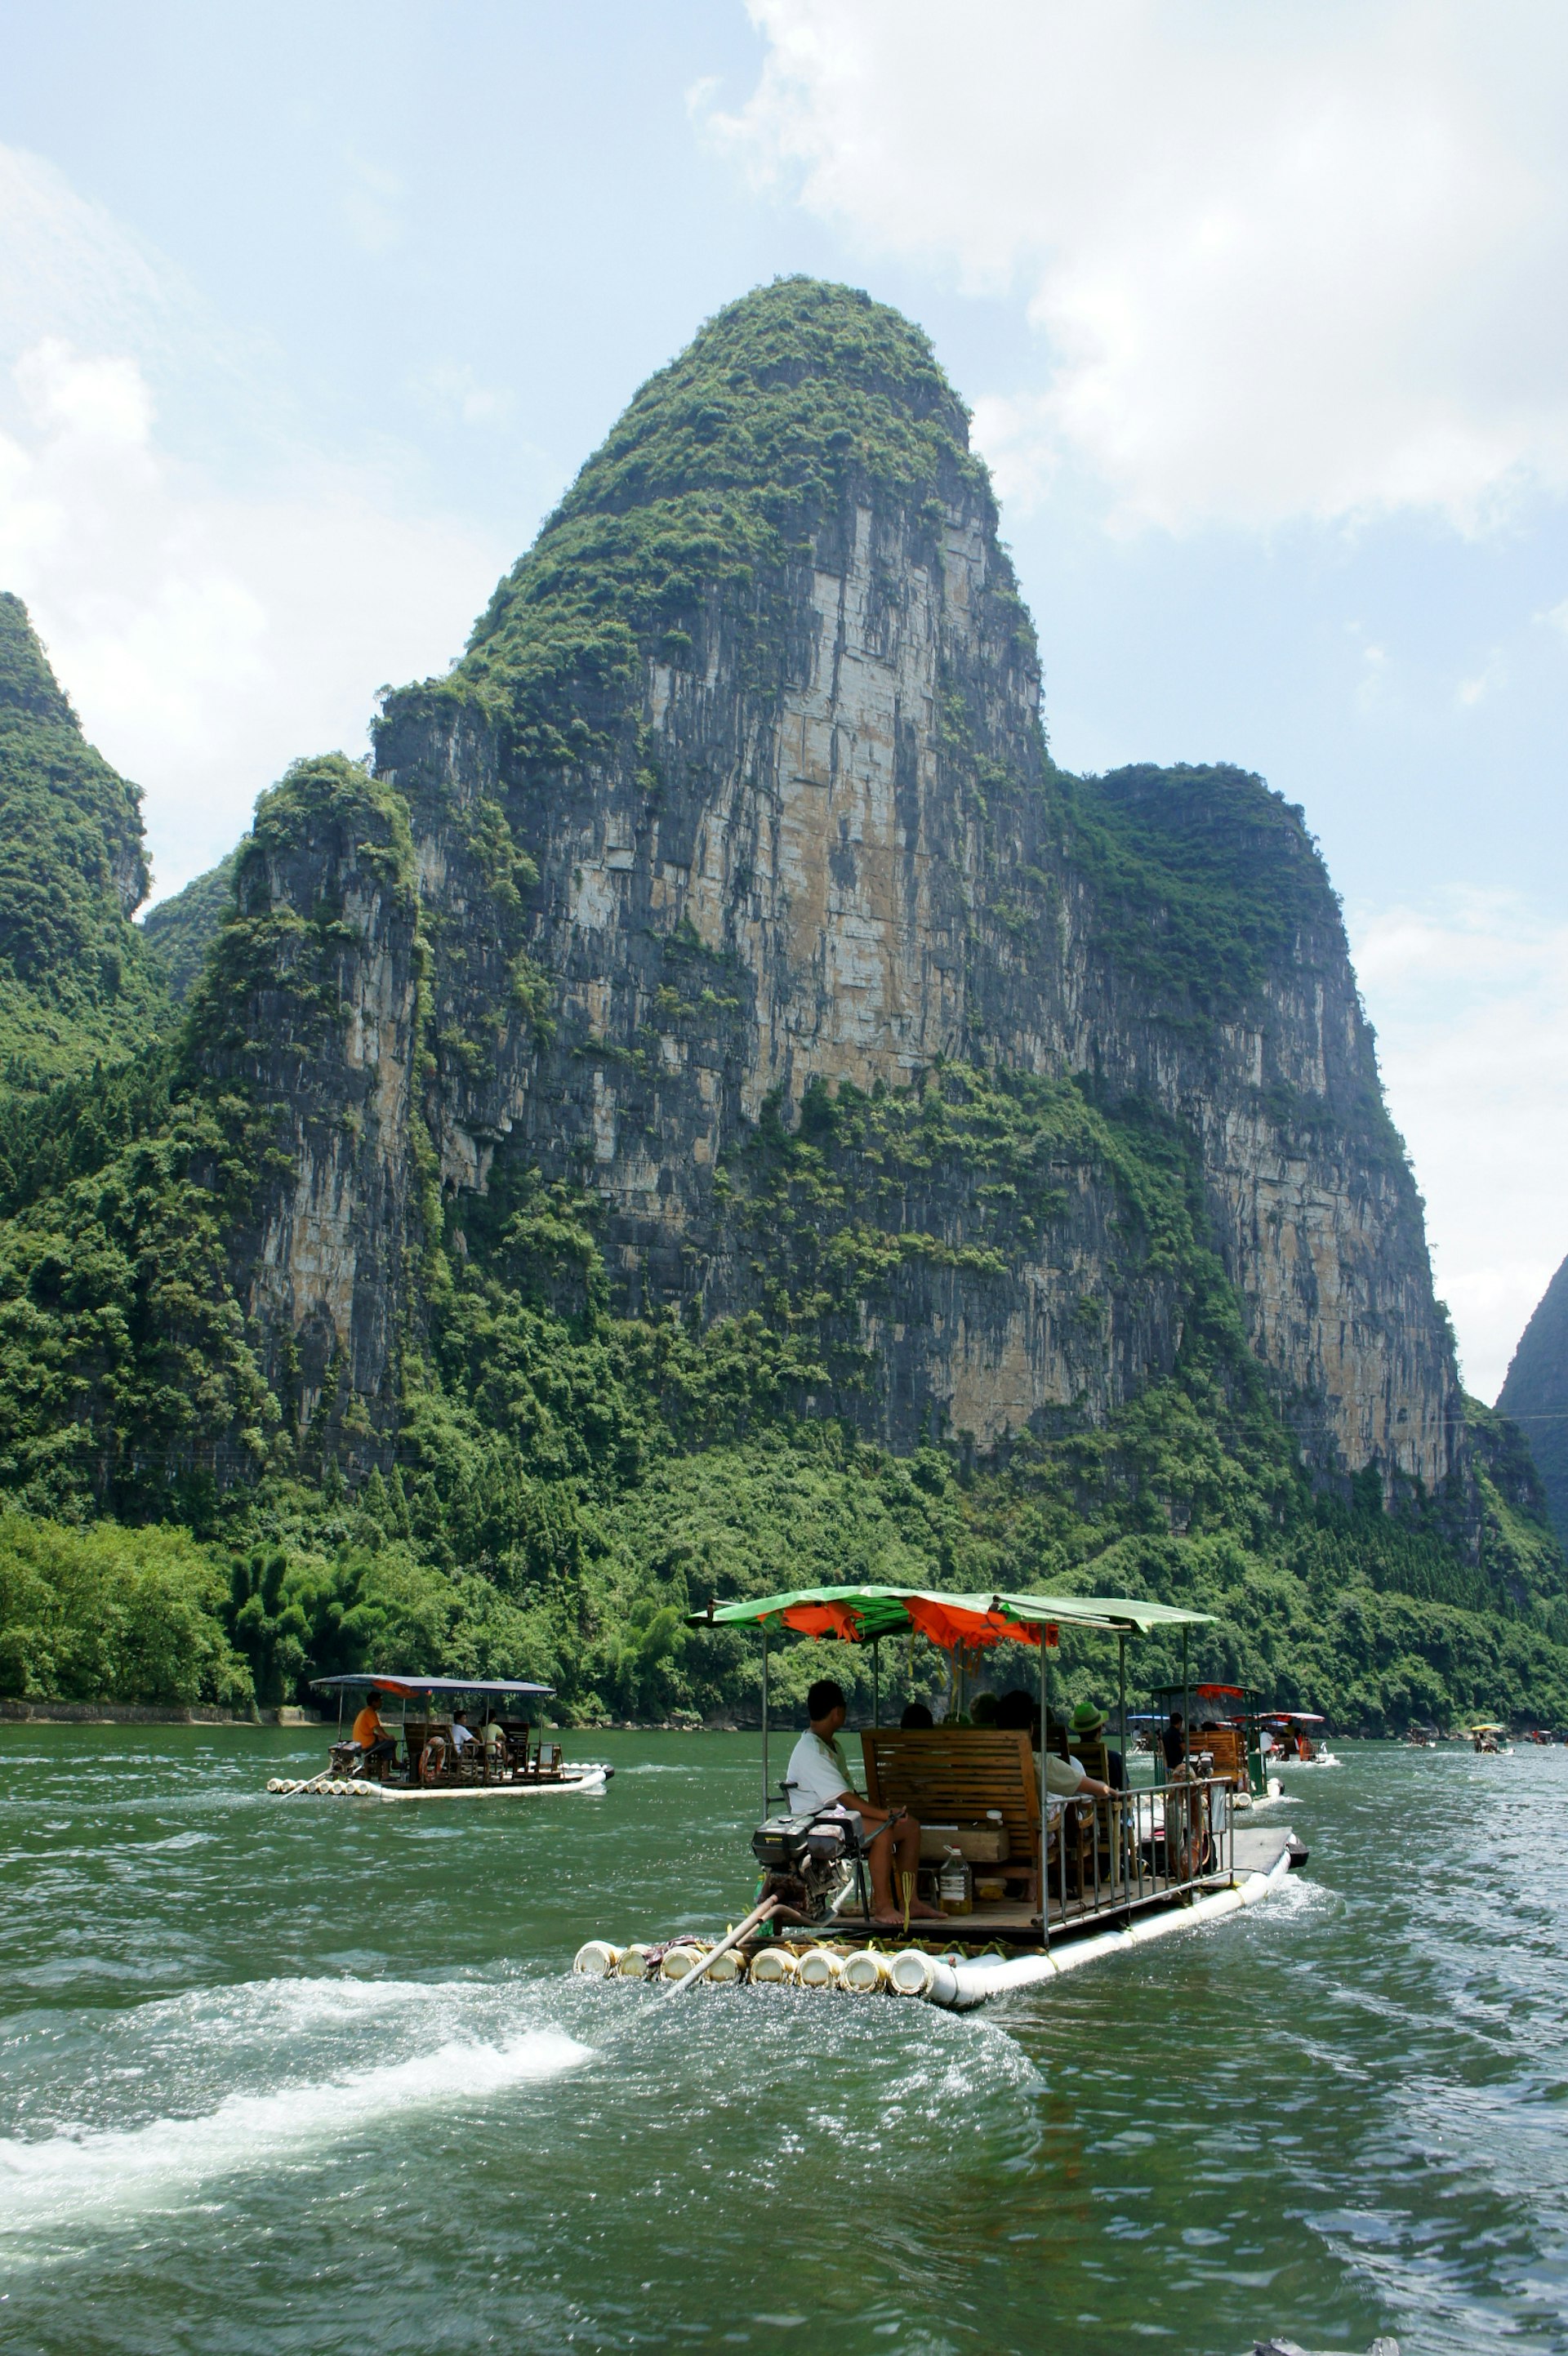 Two boats on the Li River, Guilin, with a large rocky feature looming over the river